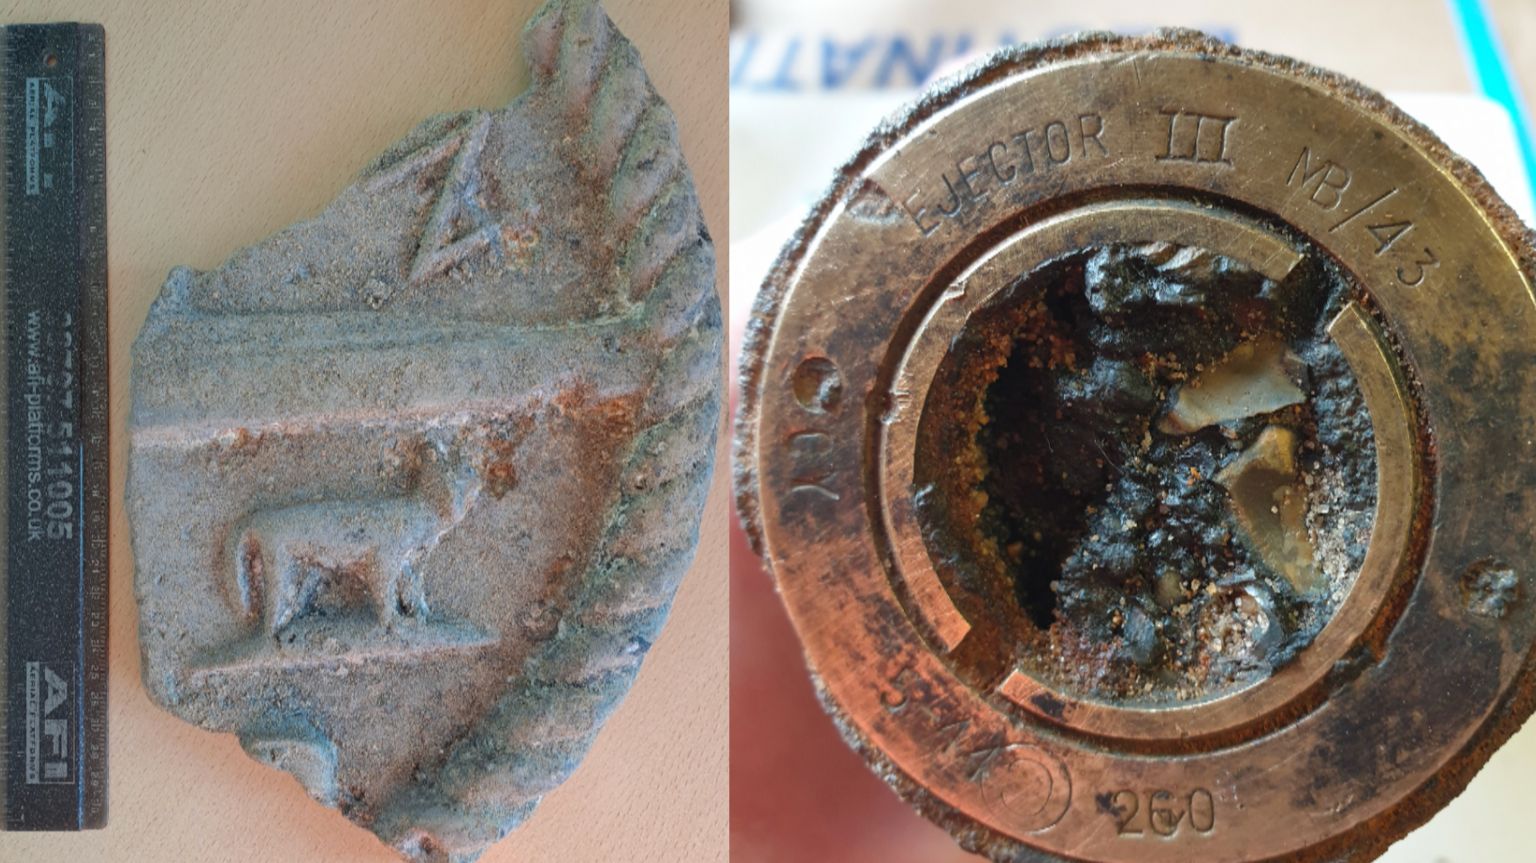 Broken part of the submarine crest and a brass round part with "ejector" etched in